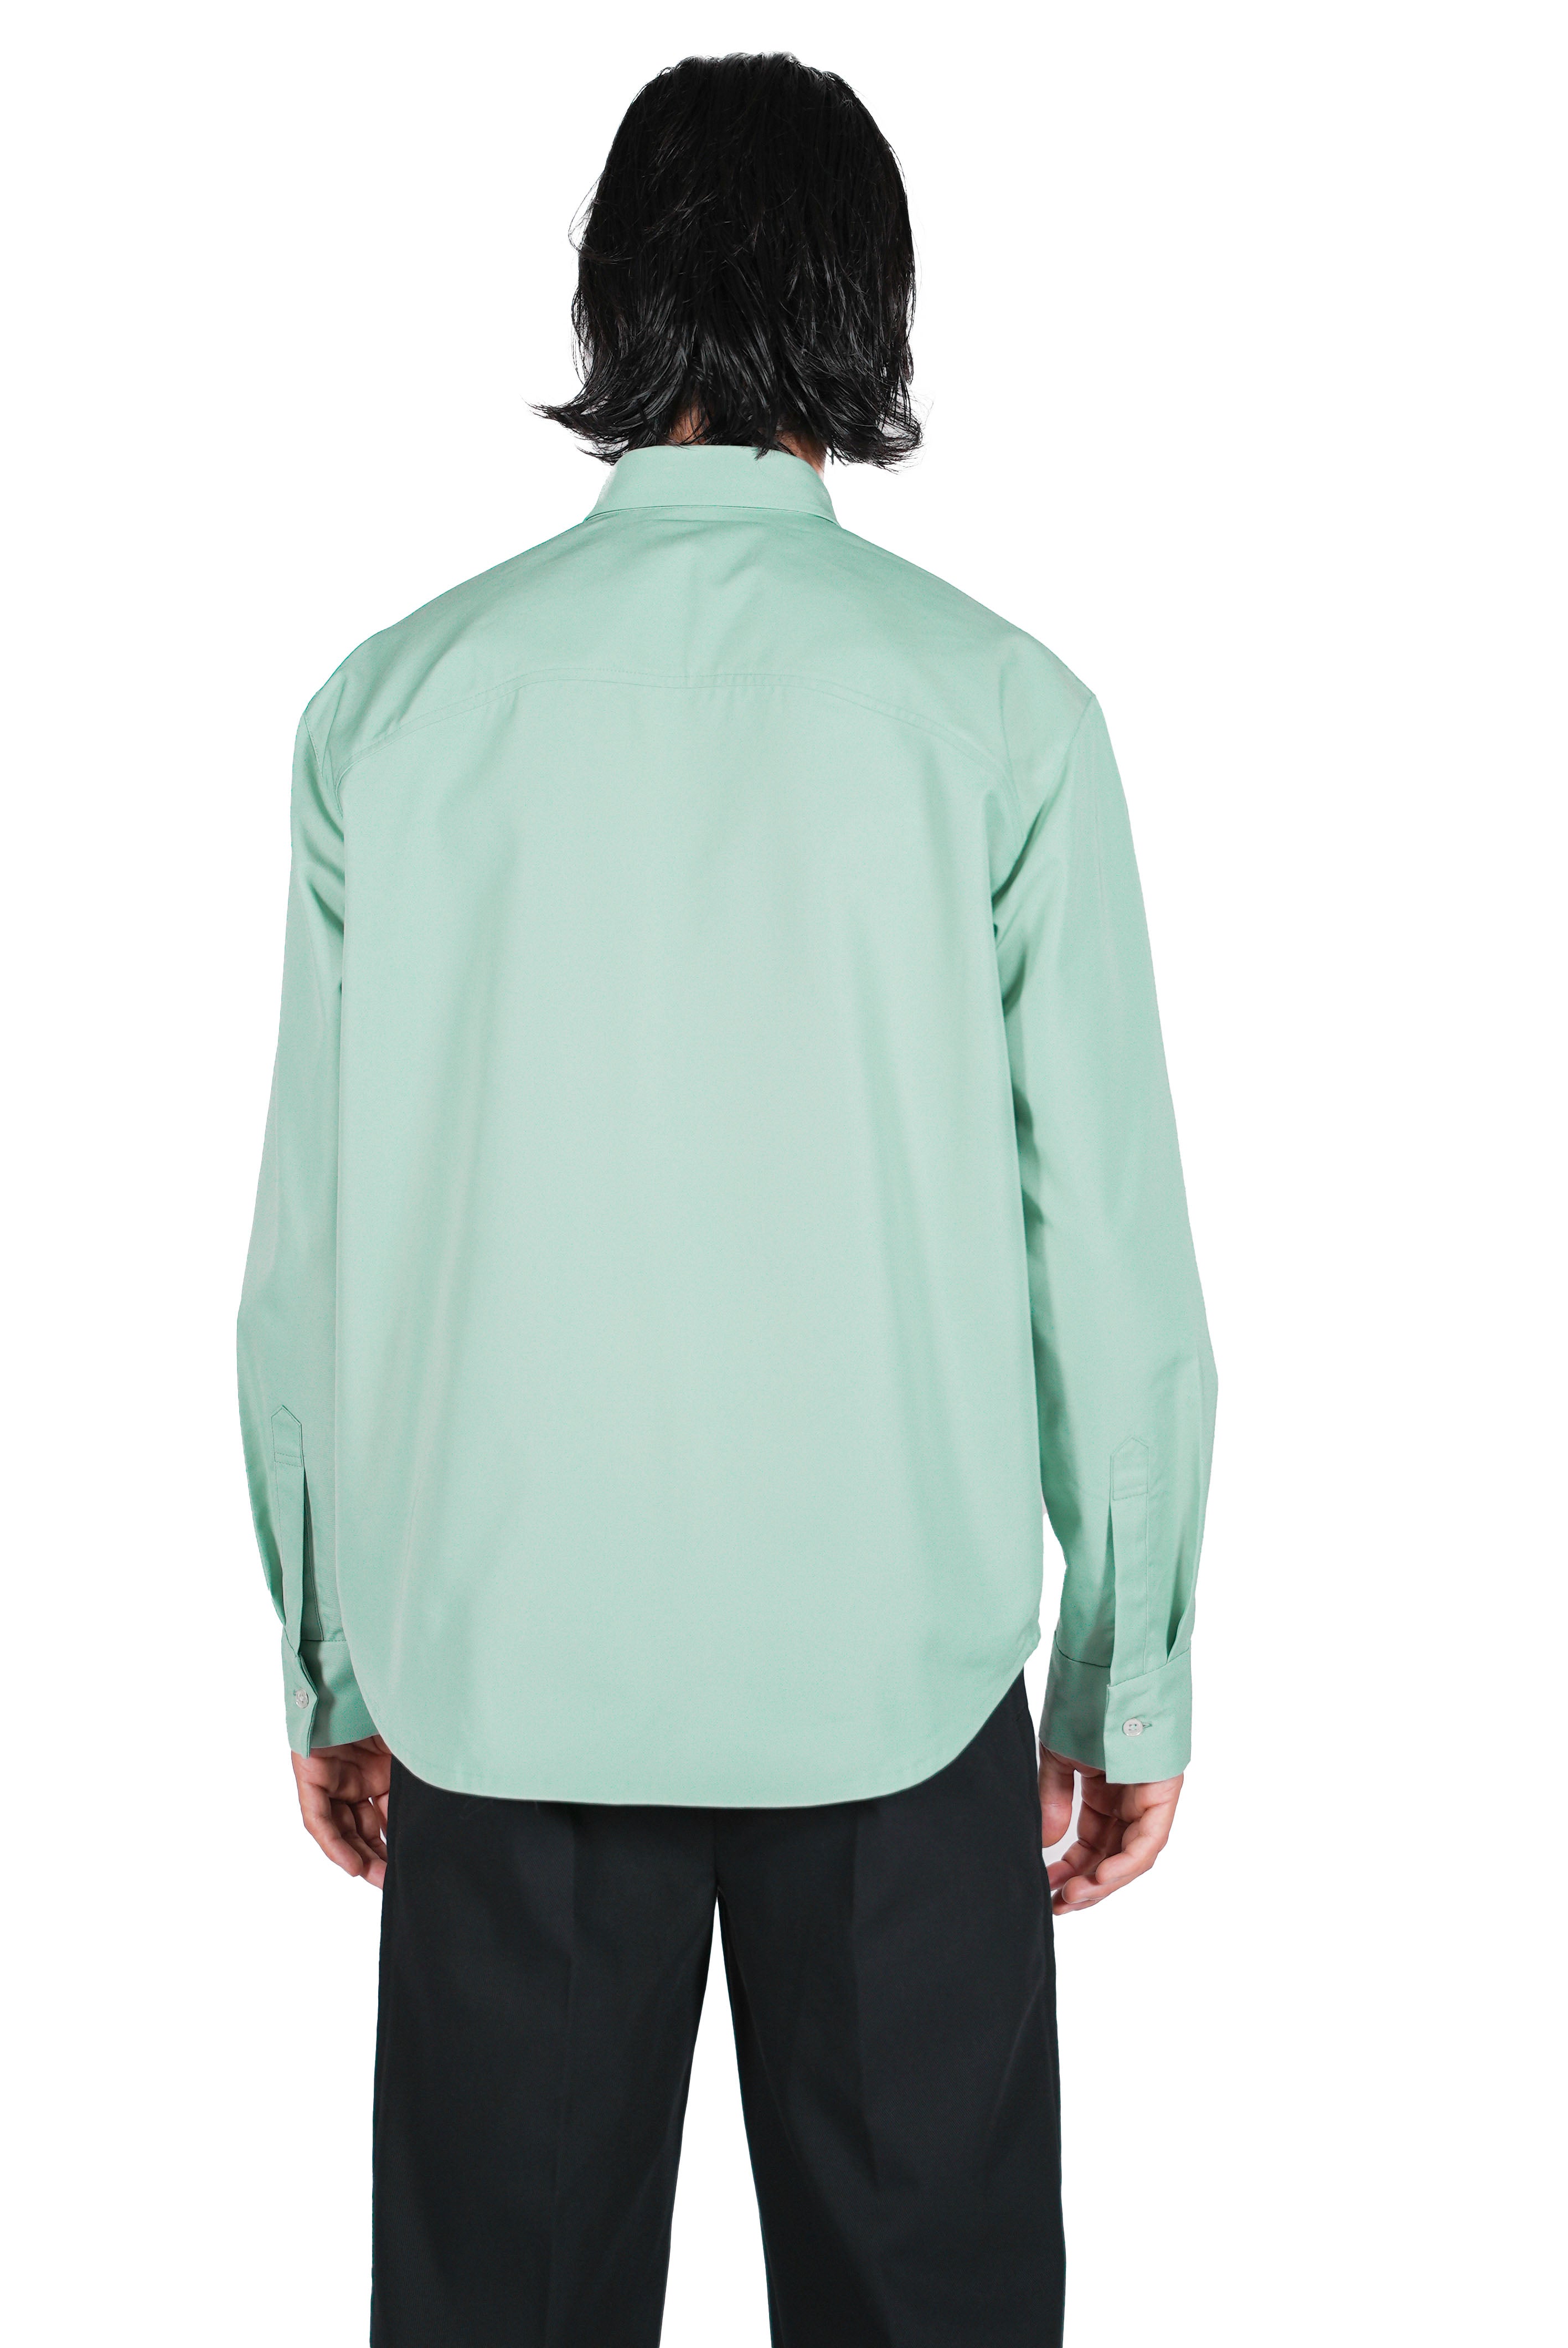 ours strong 002 green shirt jacket